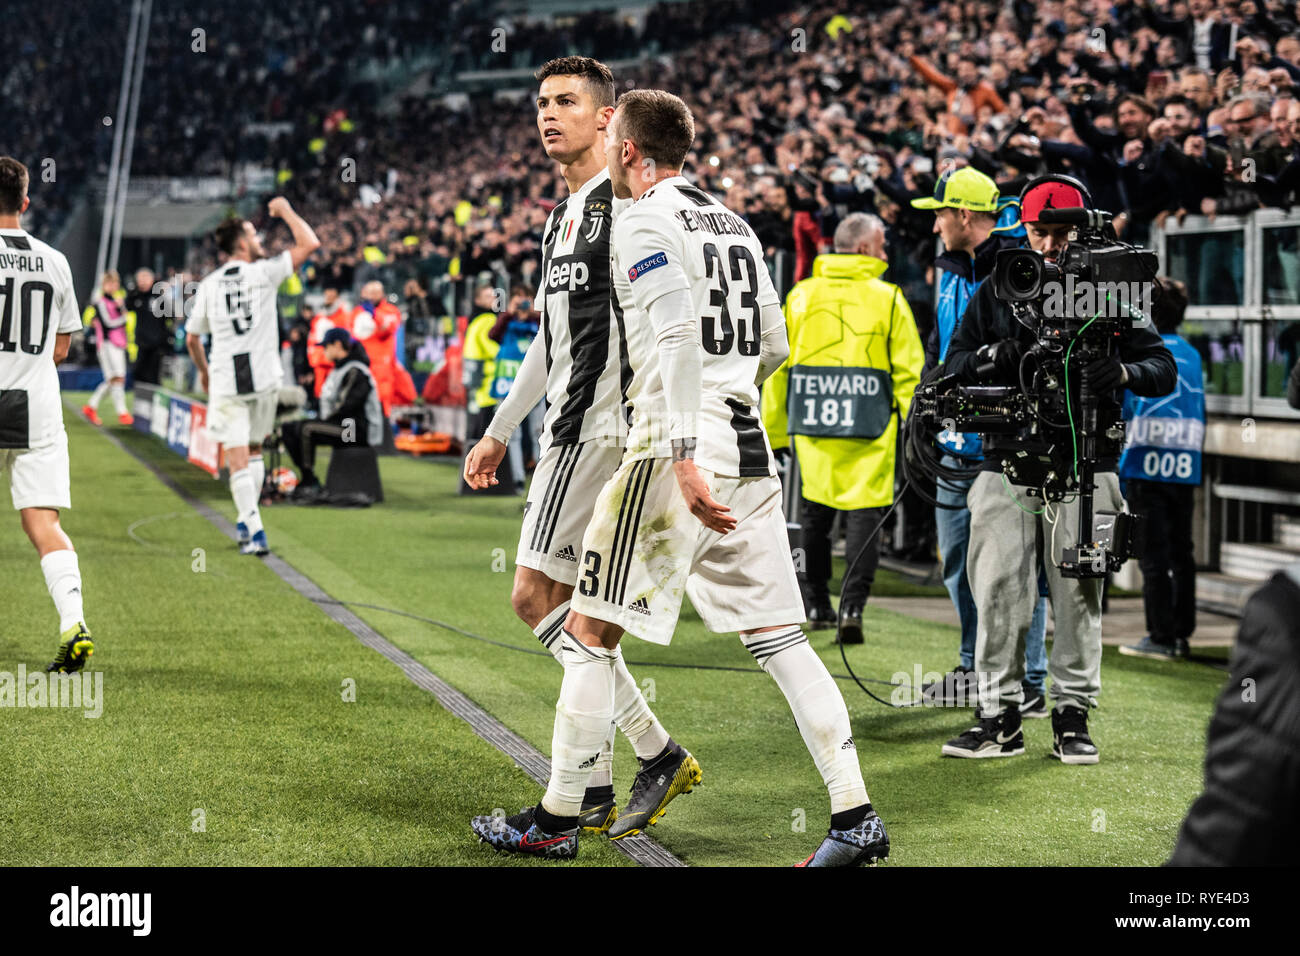 Cristiano Ronaldo of Juventus during the Champions League match: Juventus  FC vs Atletico Madrid. Juvenwus won 3-0 in Turin, Italy 12th march 2019  (Photo by Alberto Gandolfo/Pacific Press Stock Photo - Alamy